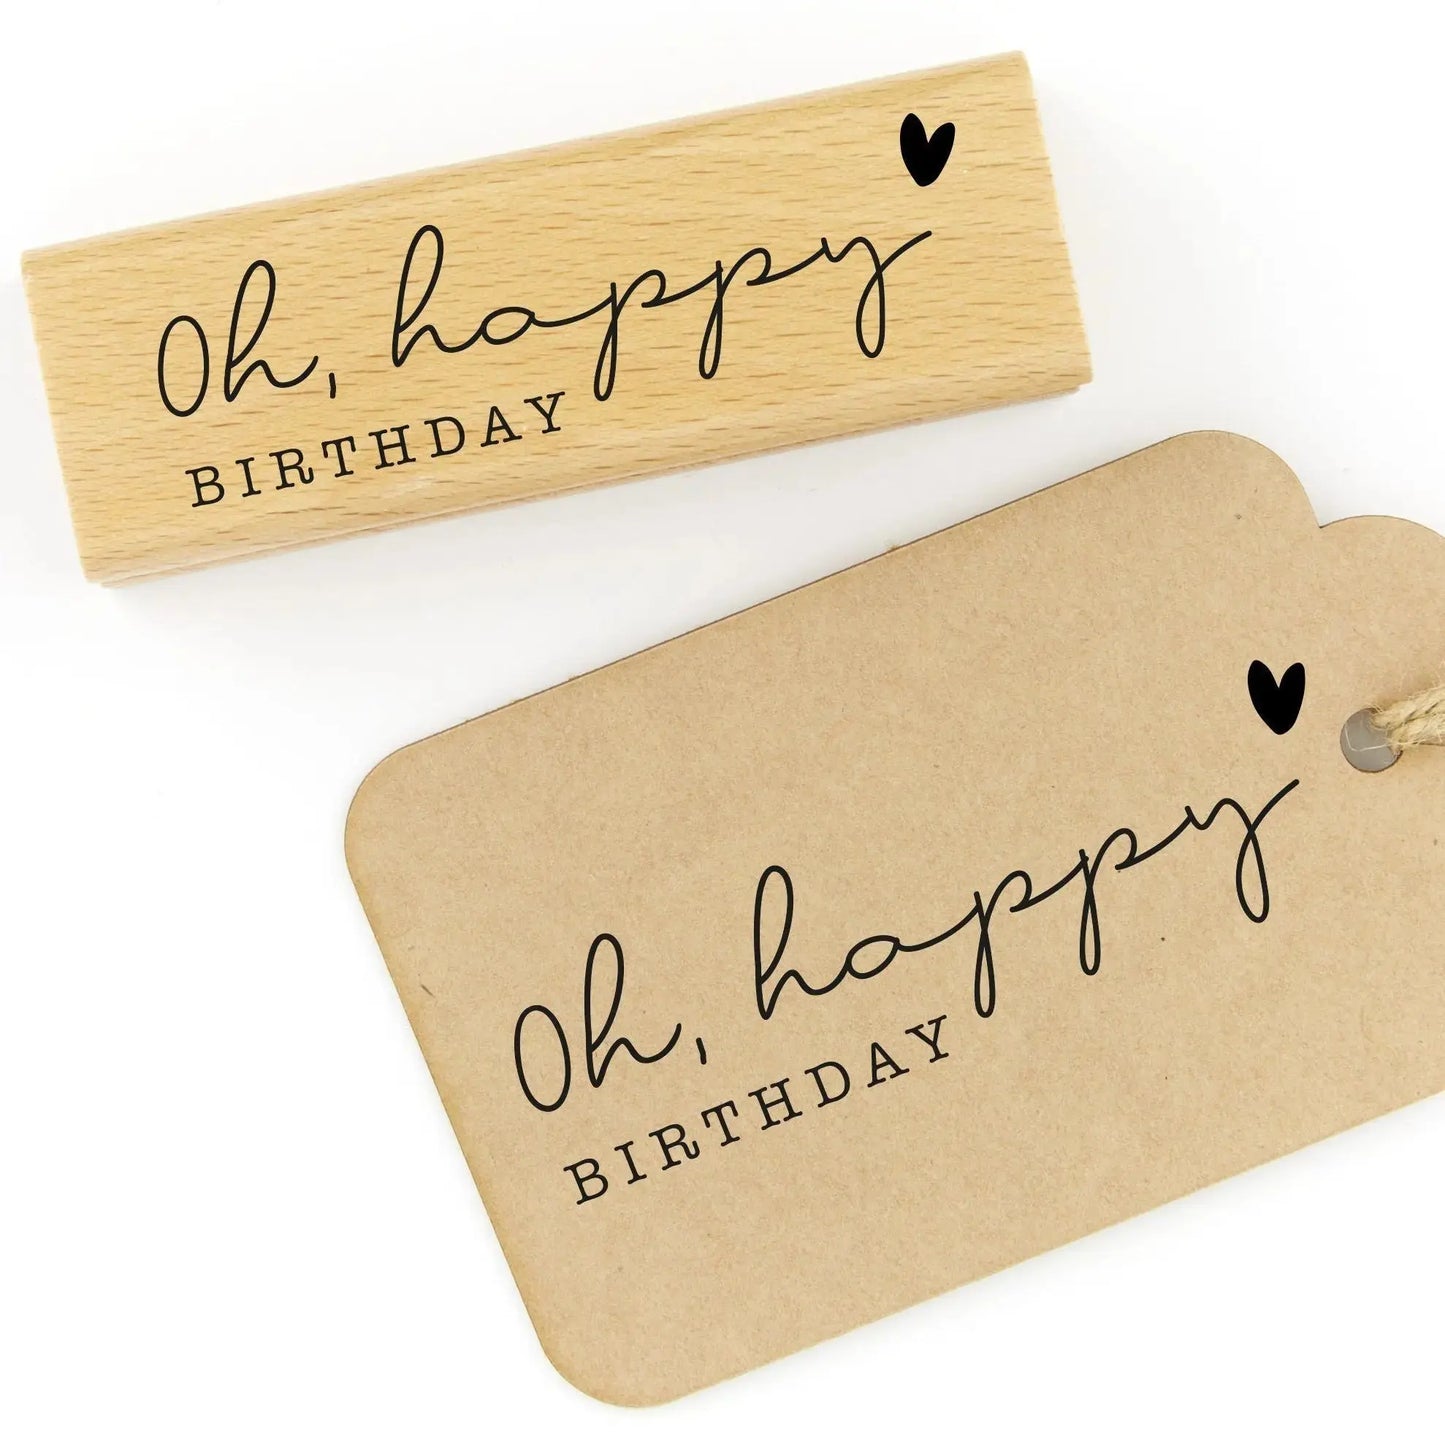 Stempel "Oh, happy birthday" extra groß - IN LOVE WITH PAPER